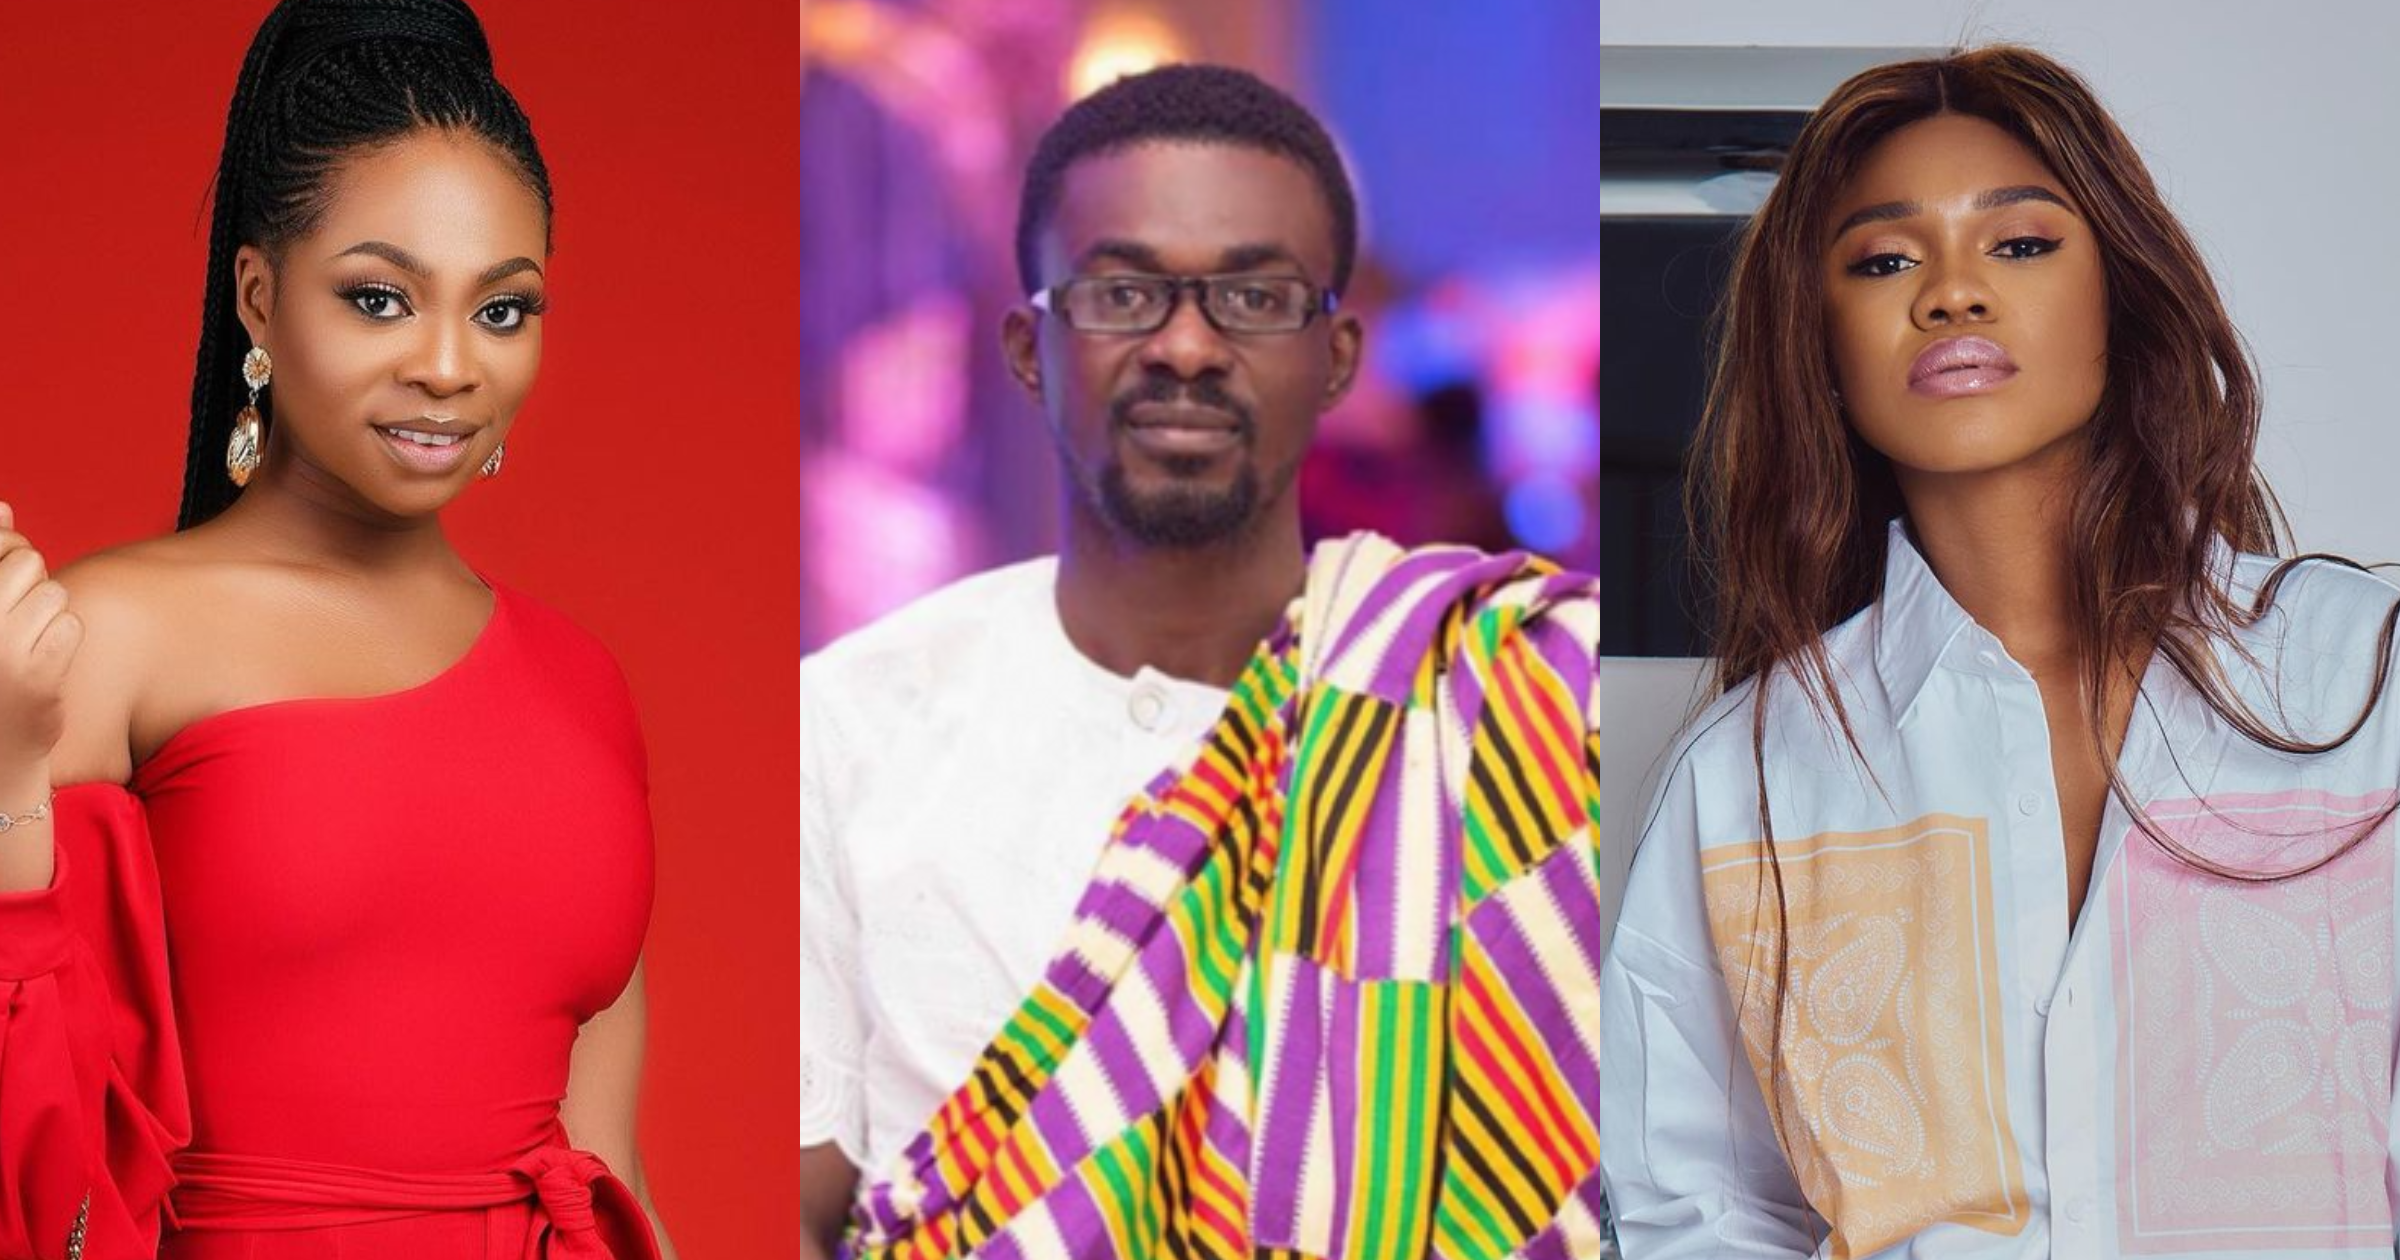 Michy and Becca were sleeping with NAM1 - Shatta Wale's 'cousin' drops more keys in new video